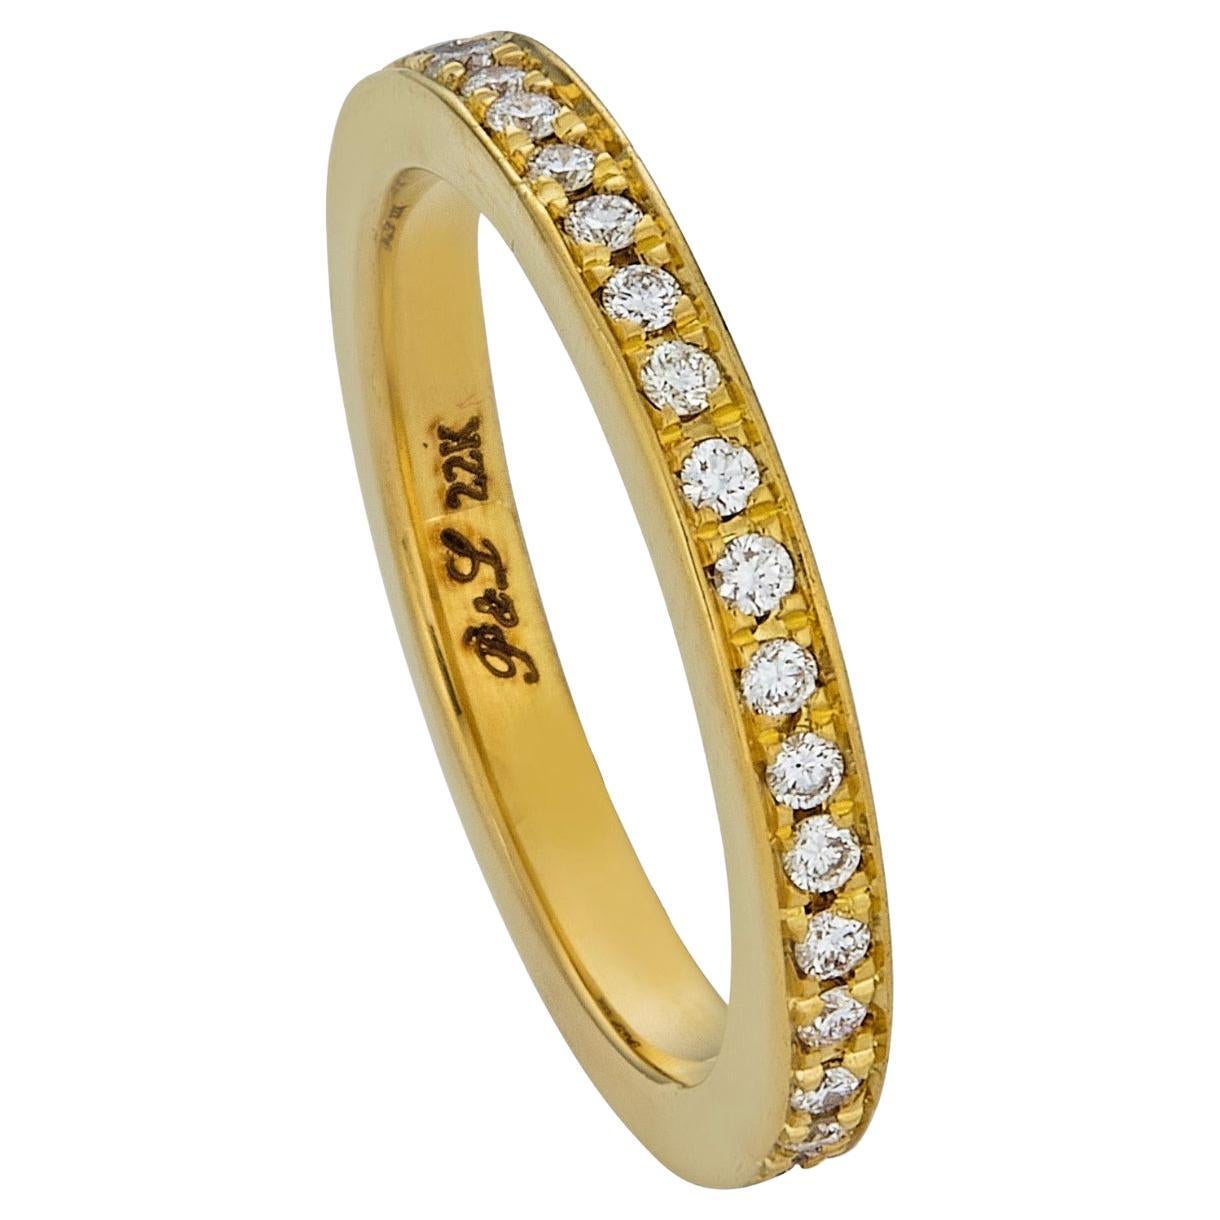 Paris & Lily, One-of-a-Kind, Handmade, 22k Gold Band with Diamonds